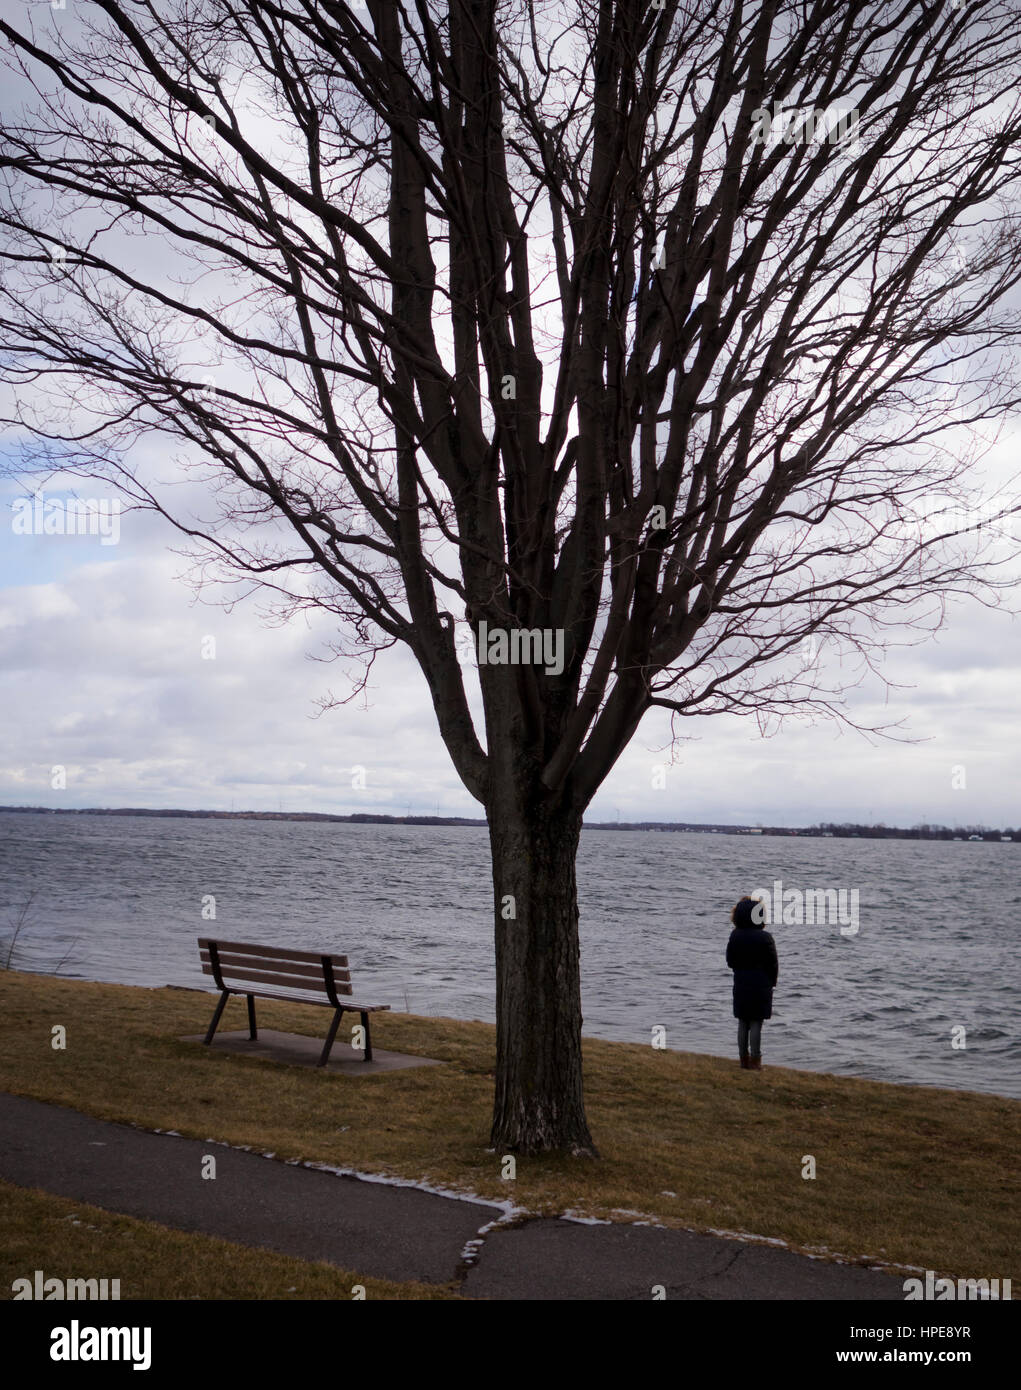 Lady Alone Thinking Watching Waterfront in Kingston Ontario, Canada standing in front of a Tree Stock Photo